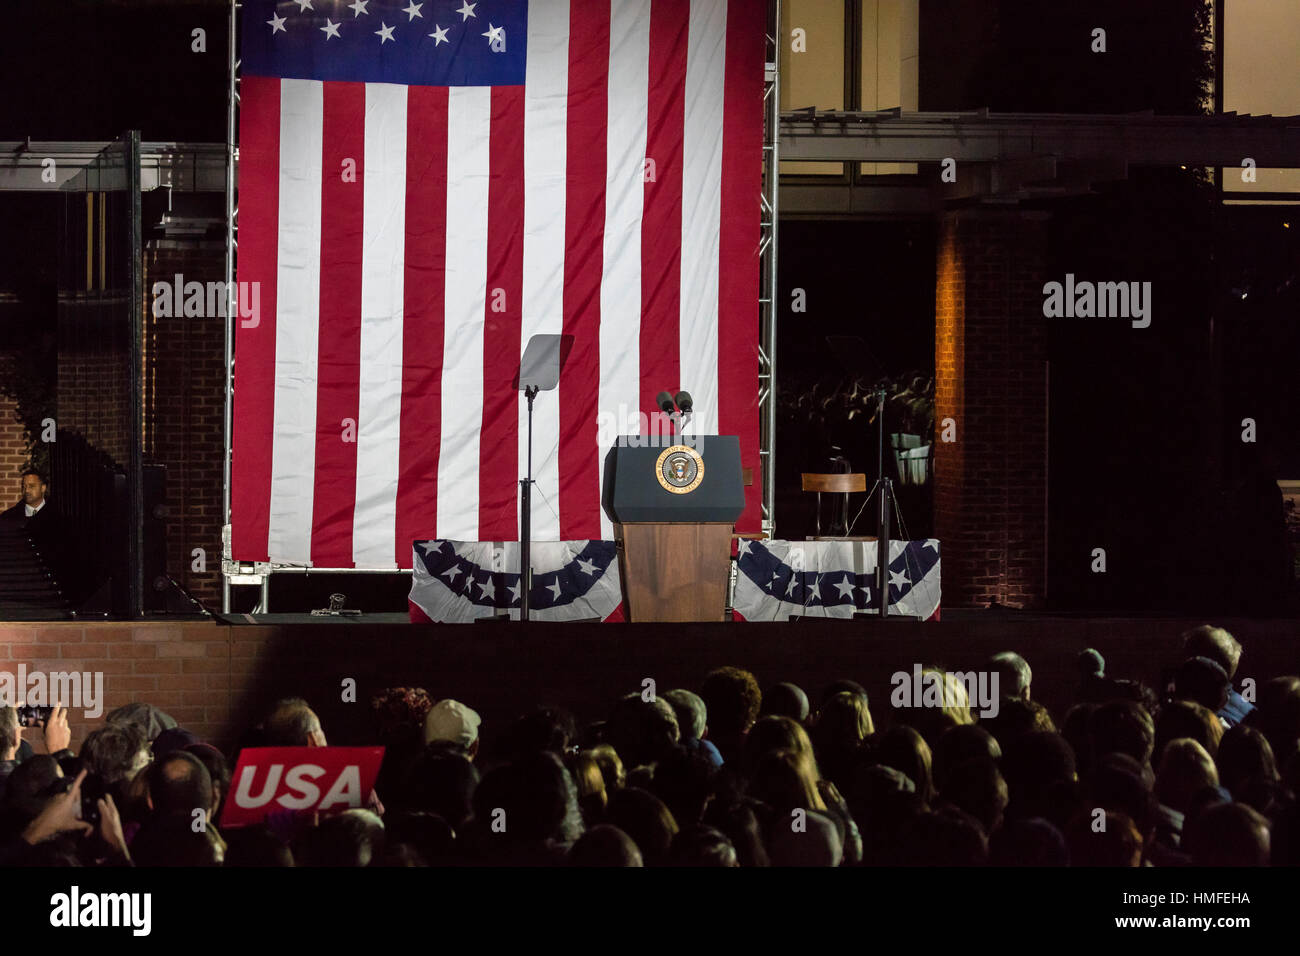 NOVEMBER 7, 2016, INDEPENDENCE HALL, PHIL., PA - Empty Podium with Presidential Seal for Presidents Obama and Clinton and Hillary Clinton Election eve political rally Independence Hall, Phil. PA Stock Photo